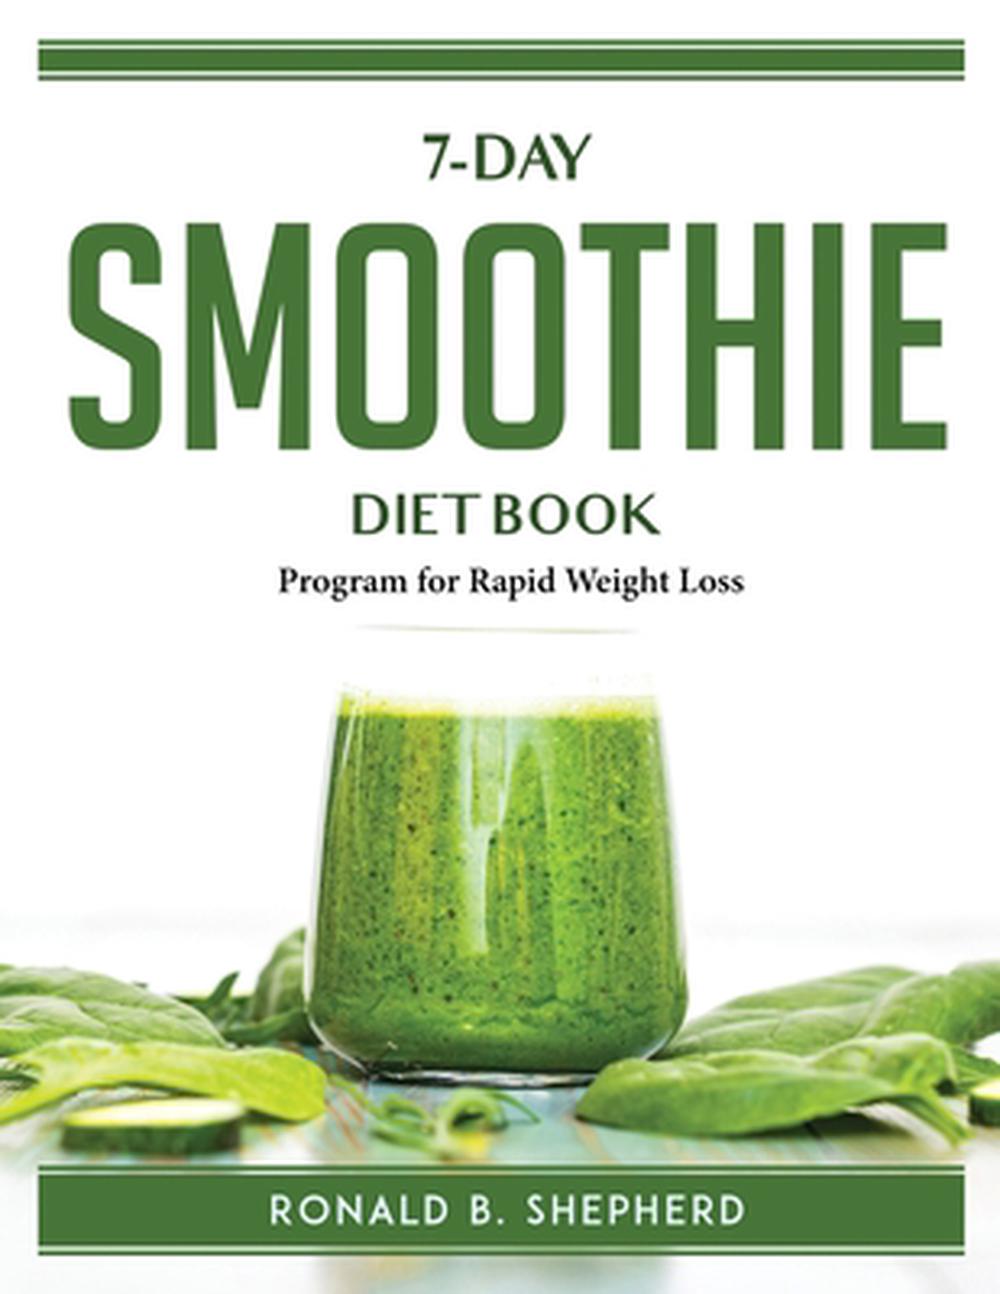 7-day Smoothie Diet Book by Ronald B. Shepherd, Paperback ...